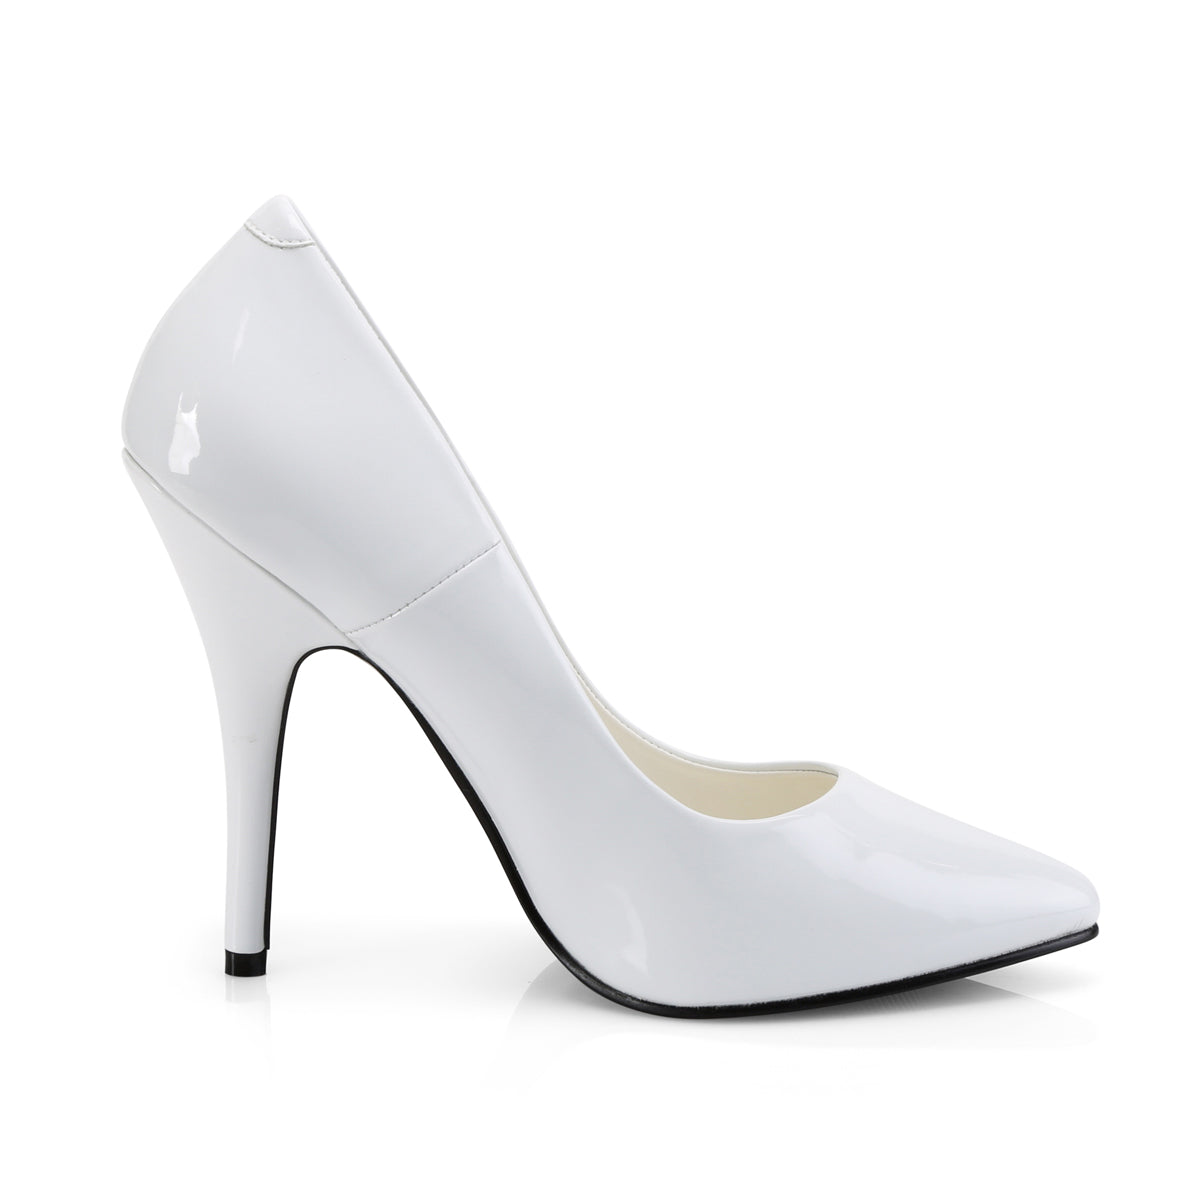 SEDUCE-420 Sexy Shoes 5" Heel White Patent Fetish Footwear-Pleaser- Sexy Shoes Fetish Heels